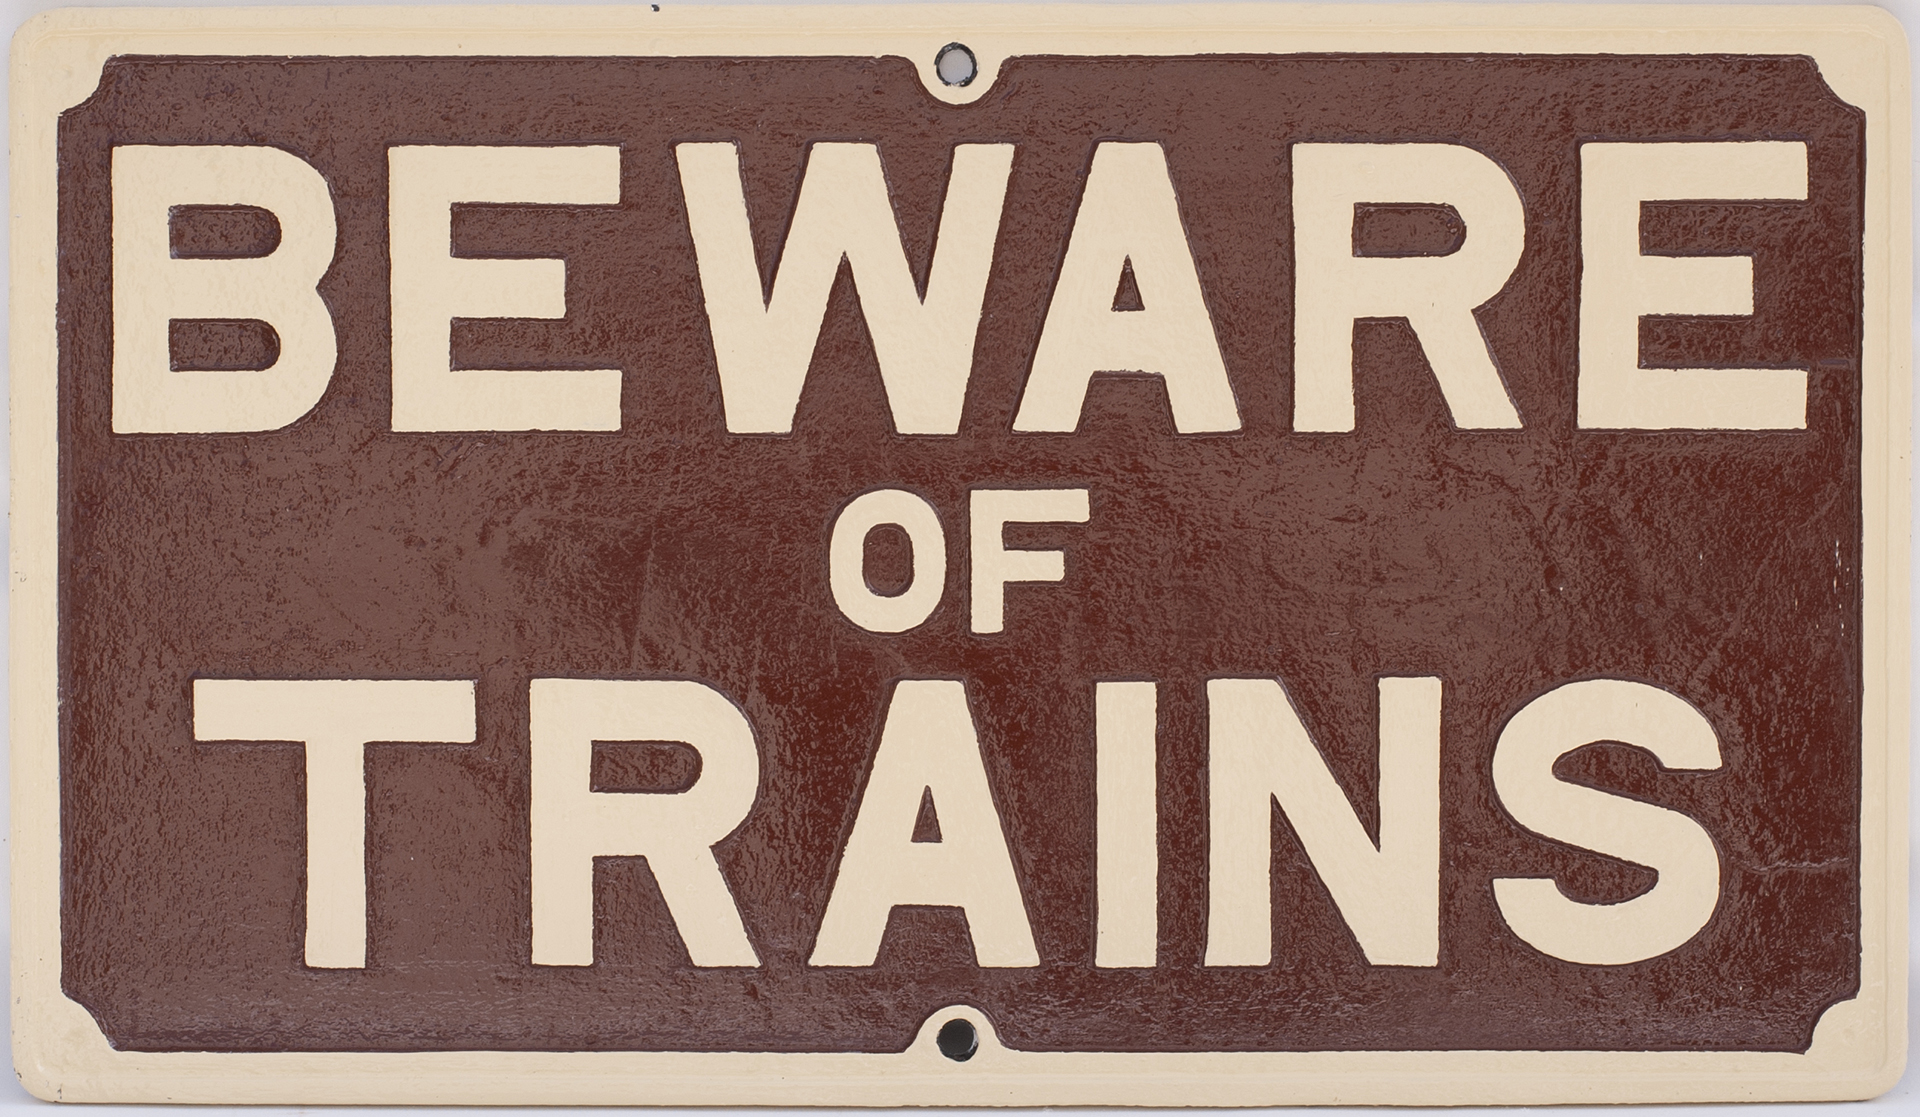 GWR Cast Iron Sign BEWARE OF TRAINS. Measures 19.25 in X 33.5 in. Nicely restored.